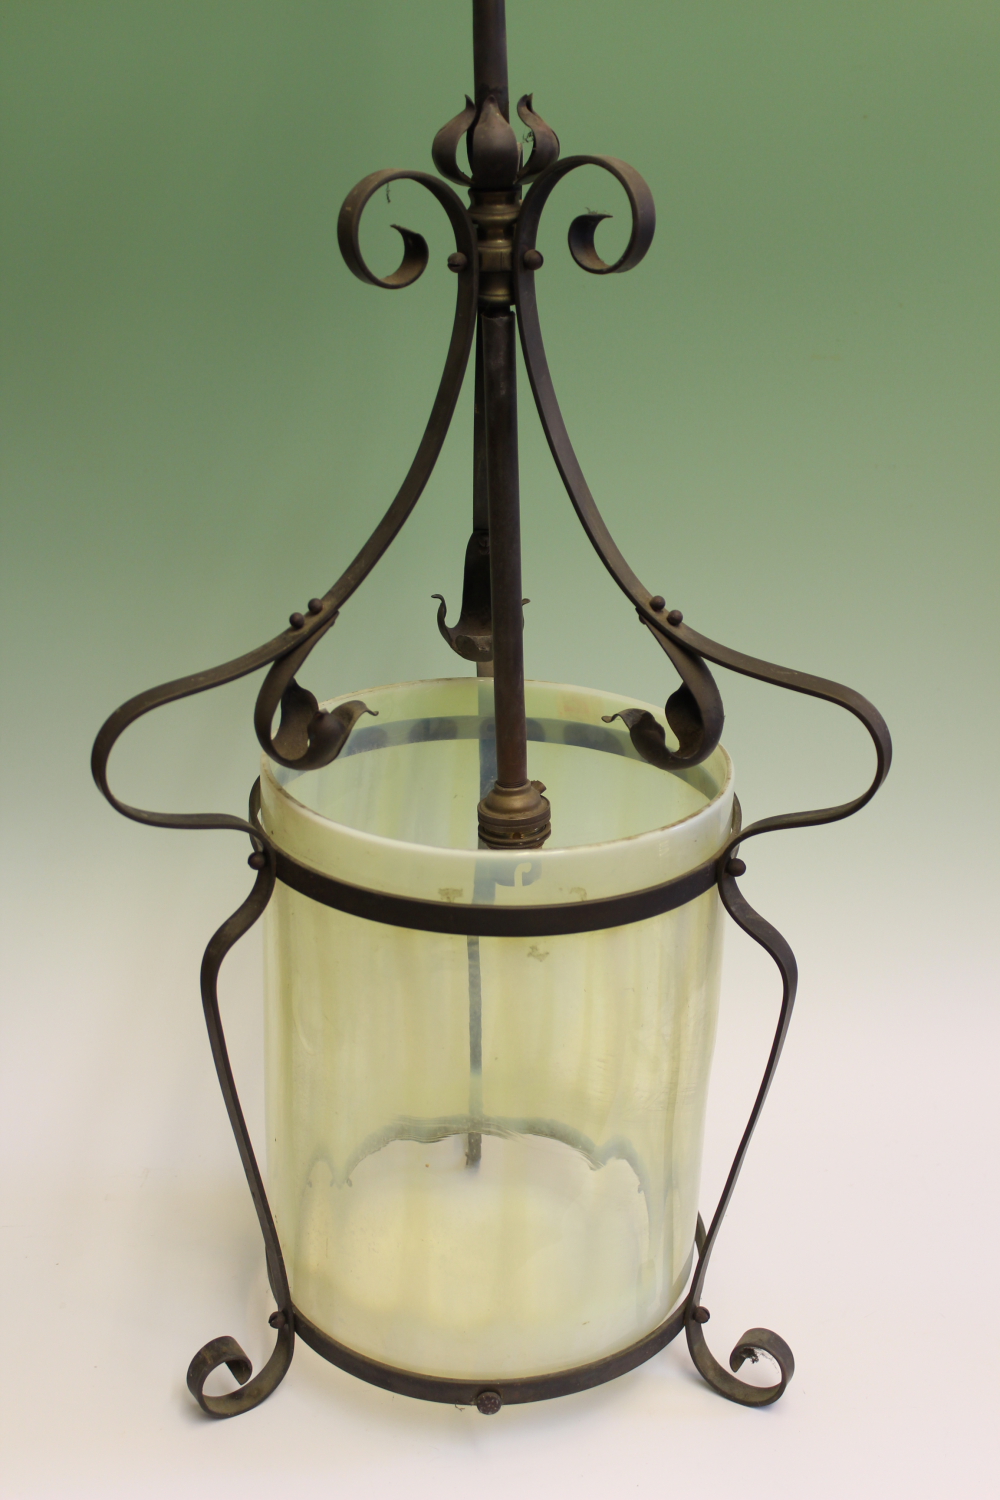 A late Victorian/Edwardian brass and copper hanging light in the manner of William Arthur Smith